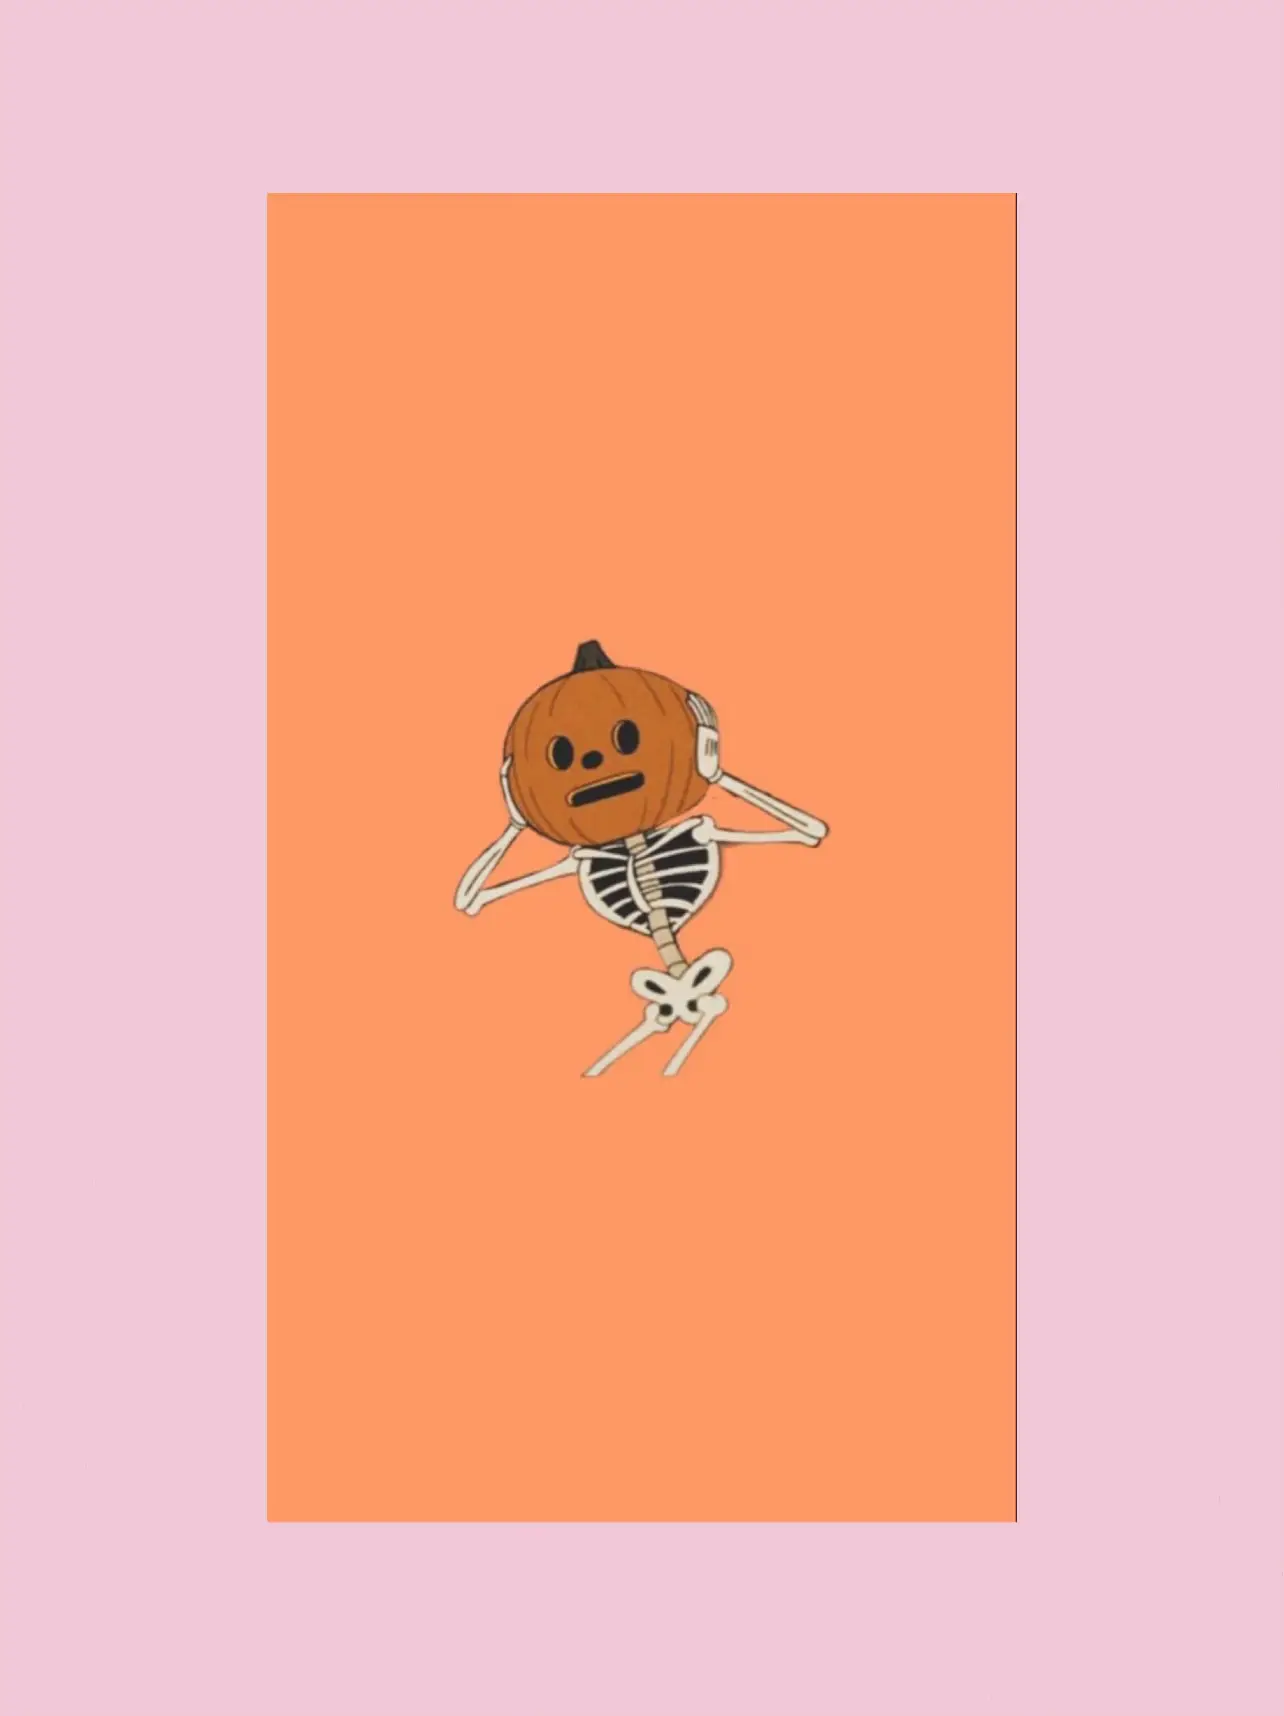 Halloween wallpapers thw day befor crismos - Lemon8 Search